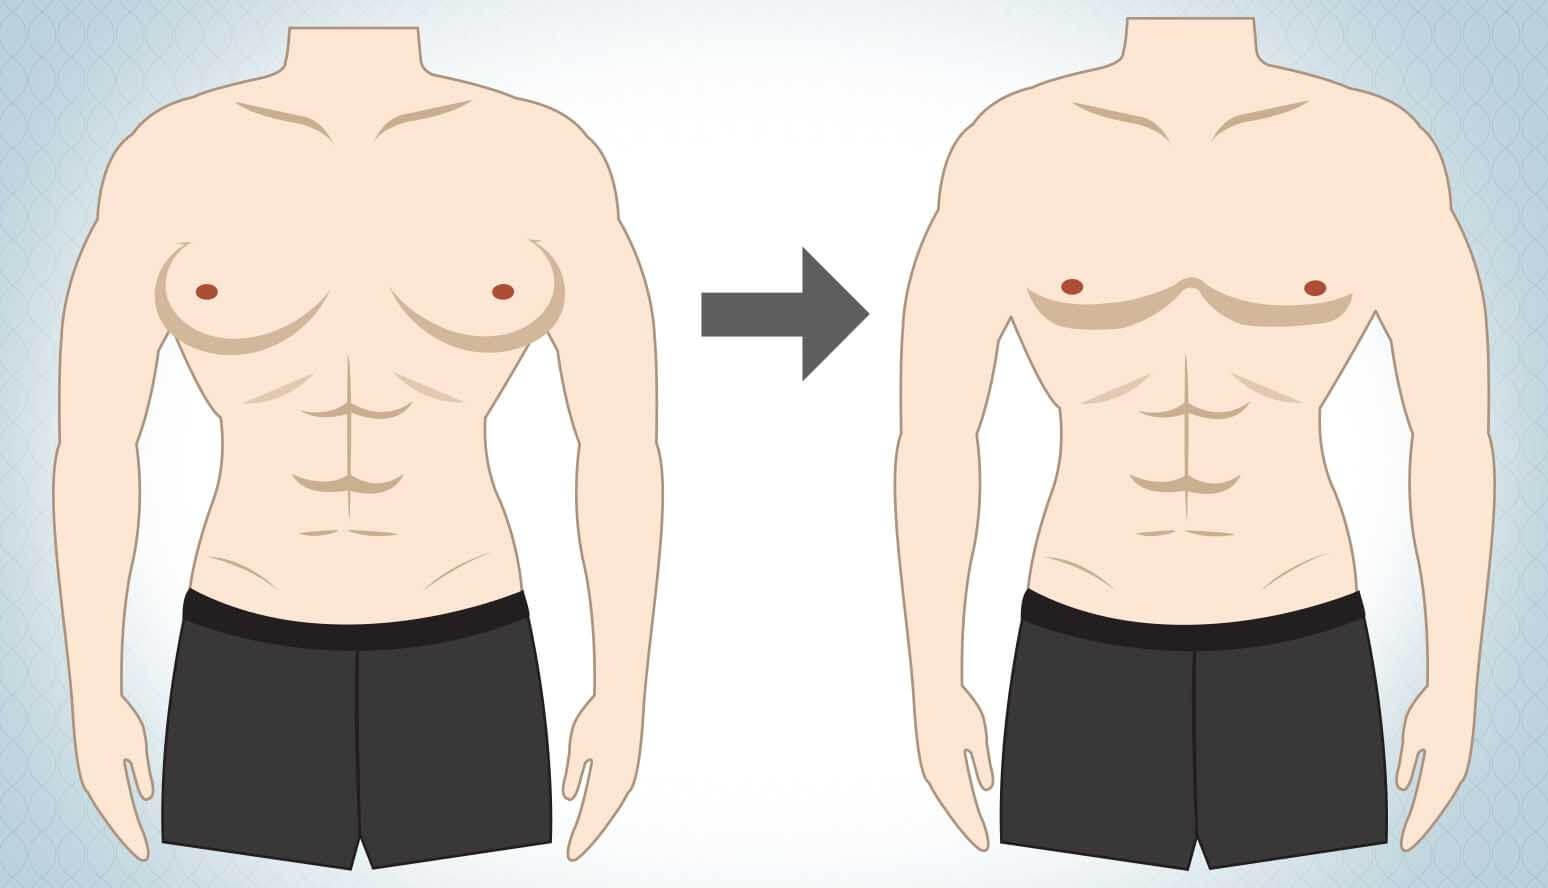 Gynecomastia Diet: Best And Worst Foods To Eat